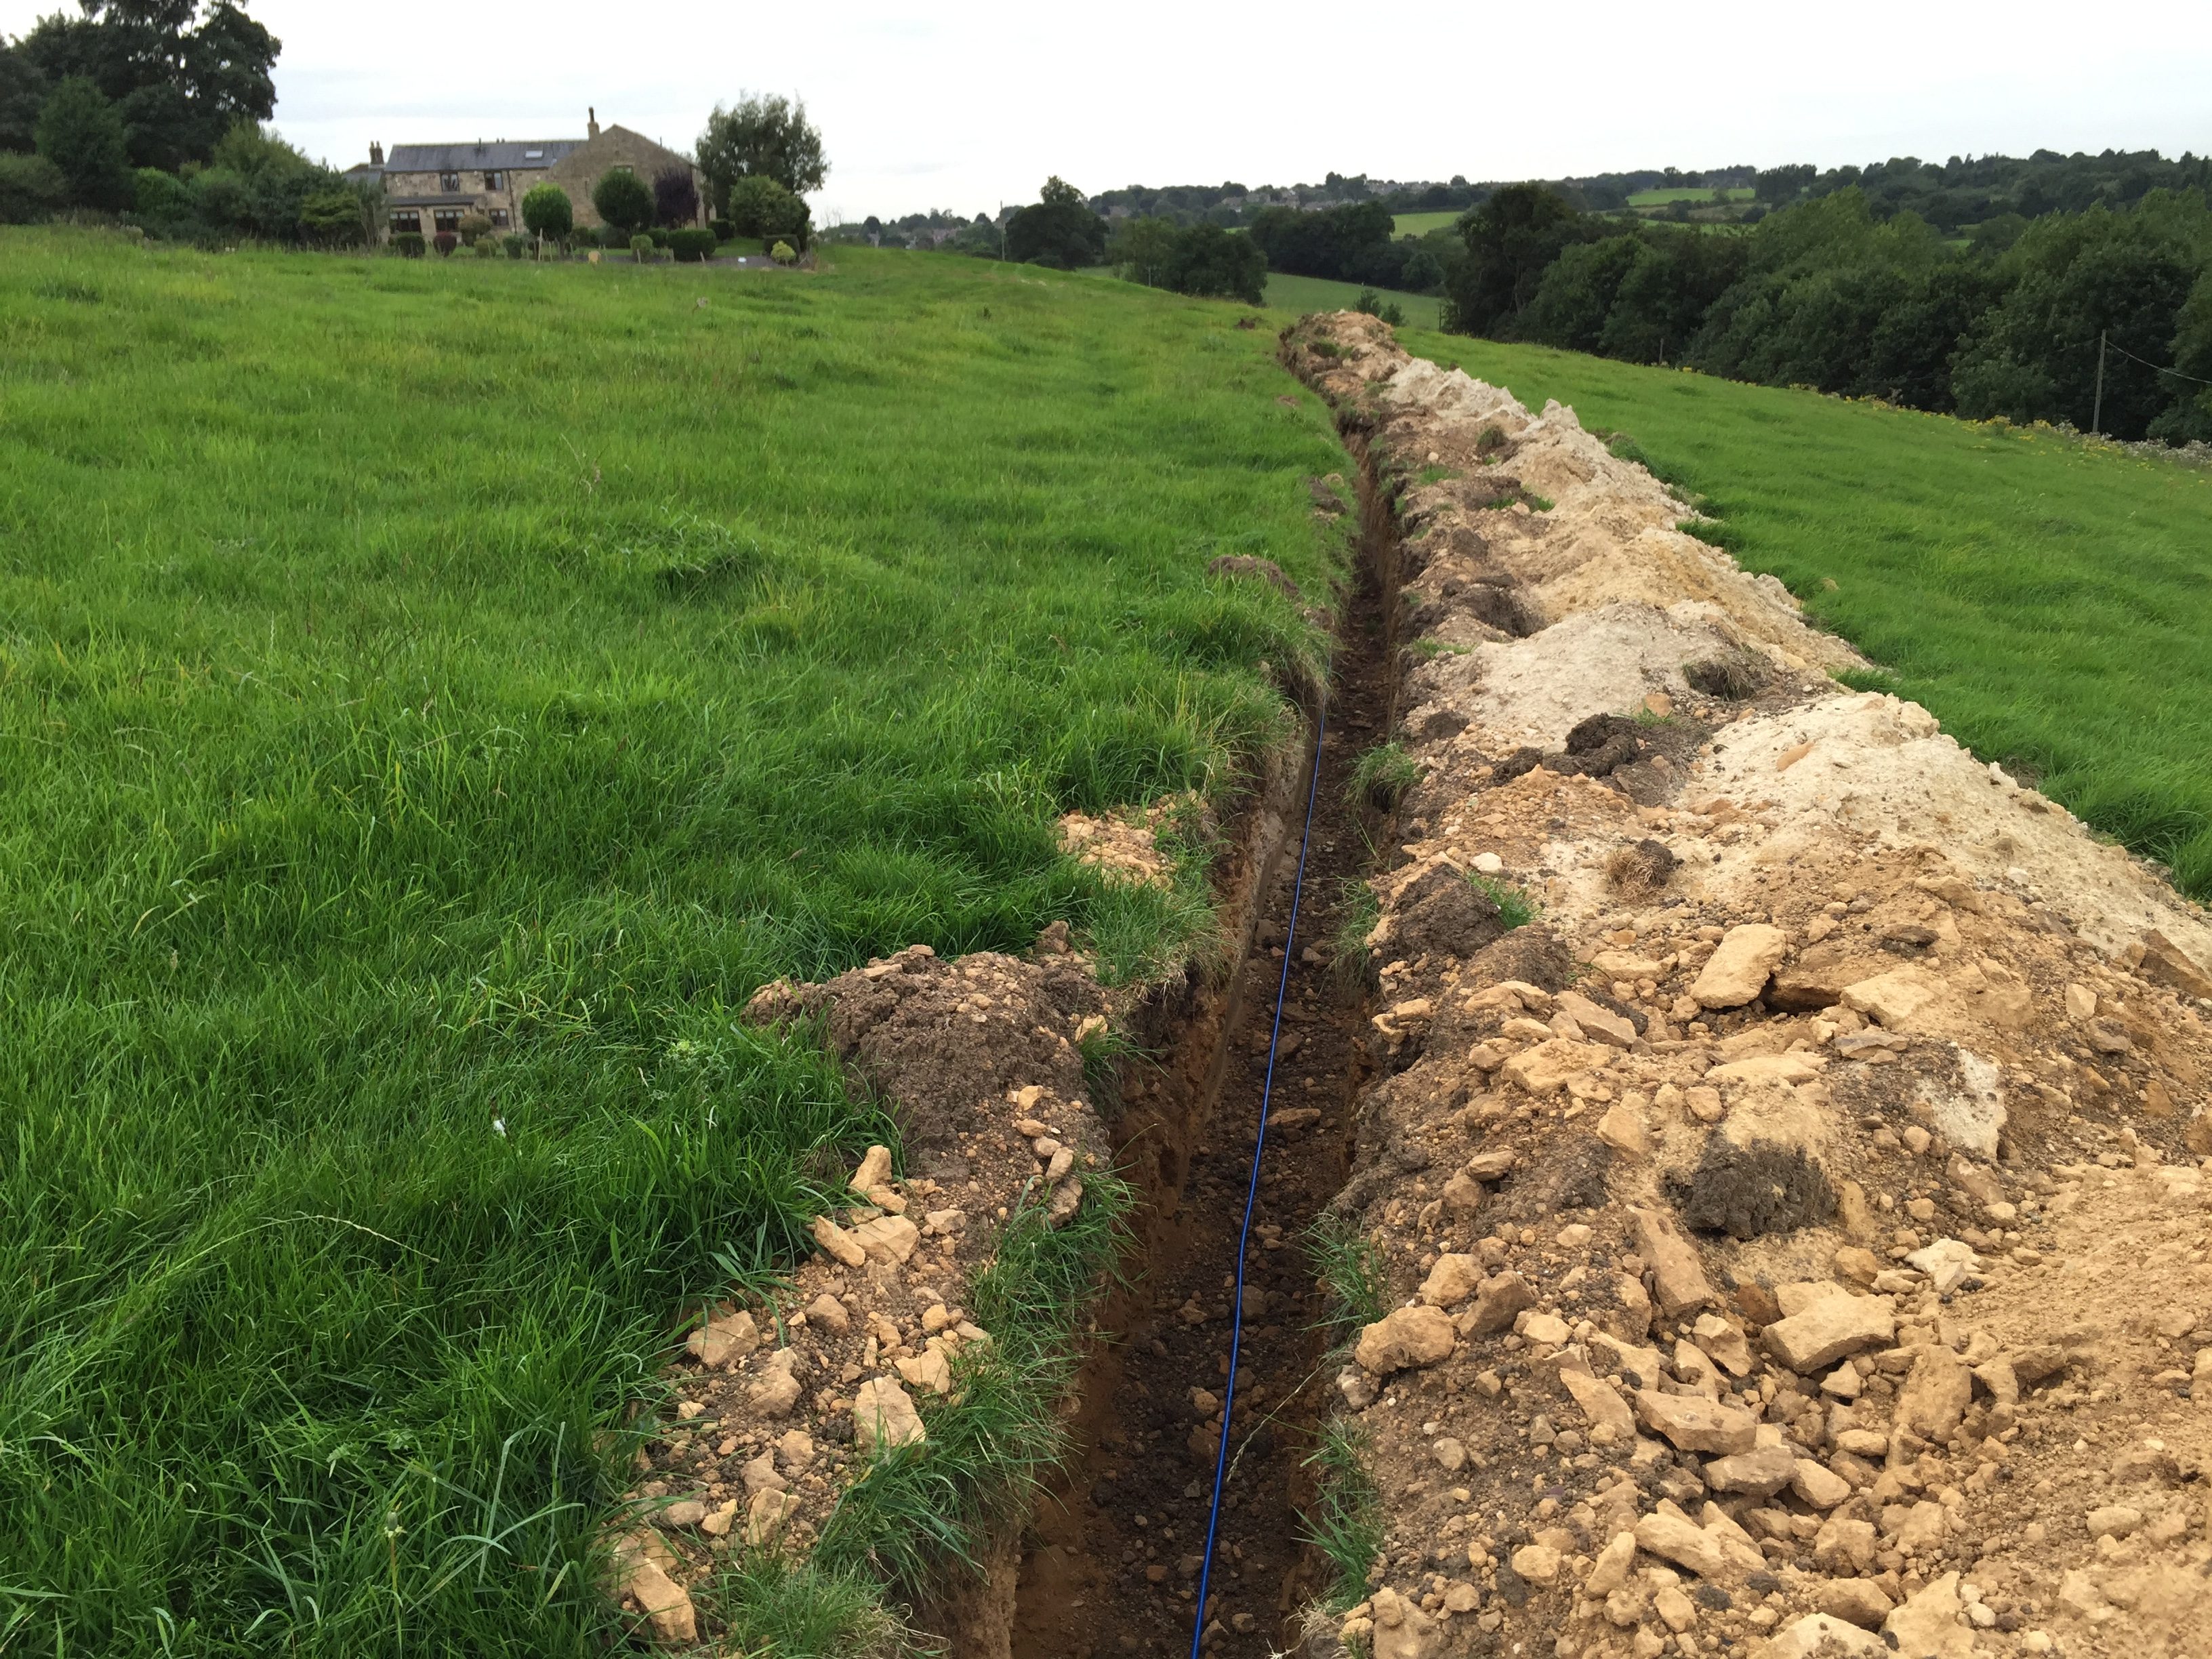 Trench dug leading to a farm in rural Eltofts